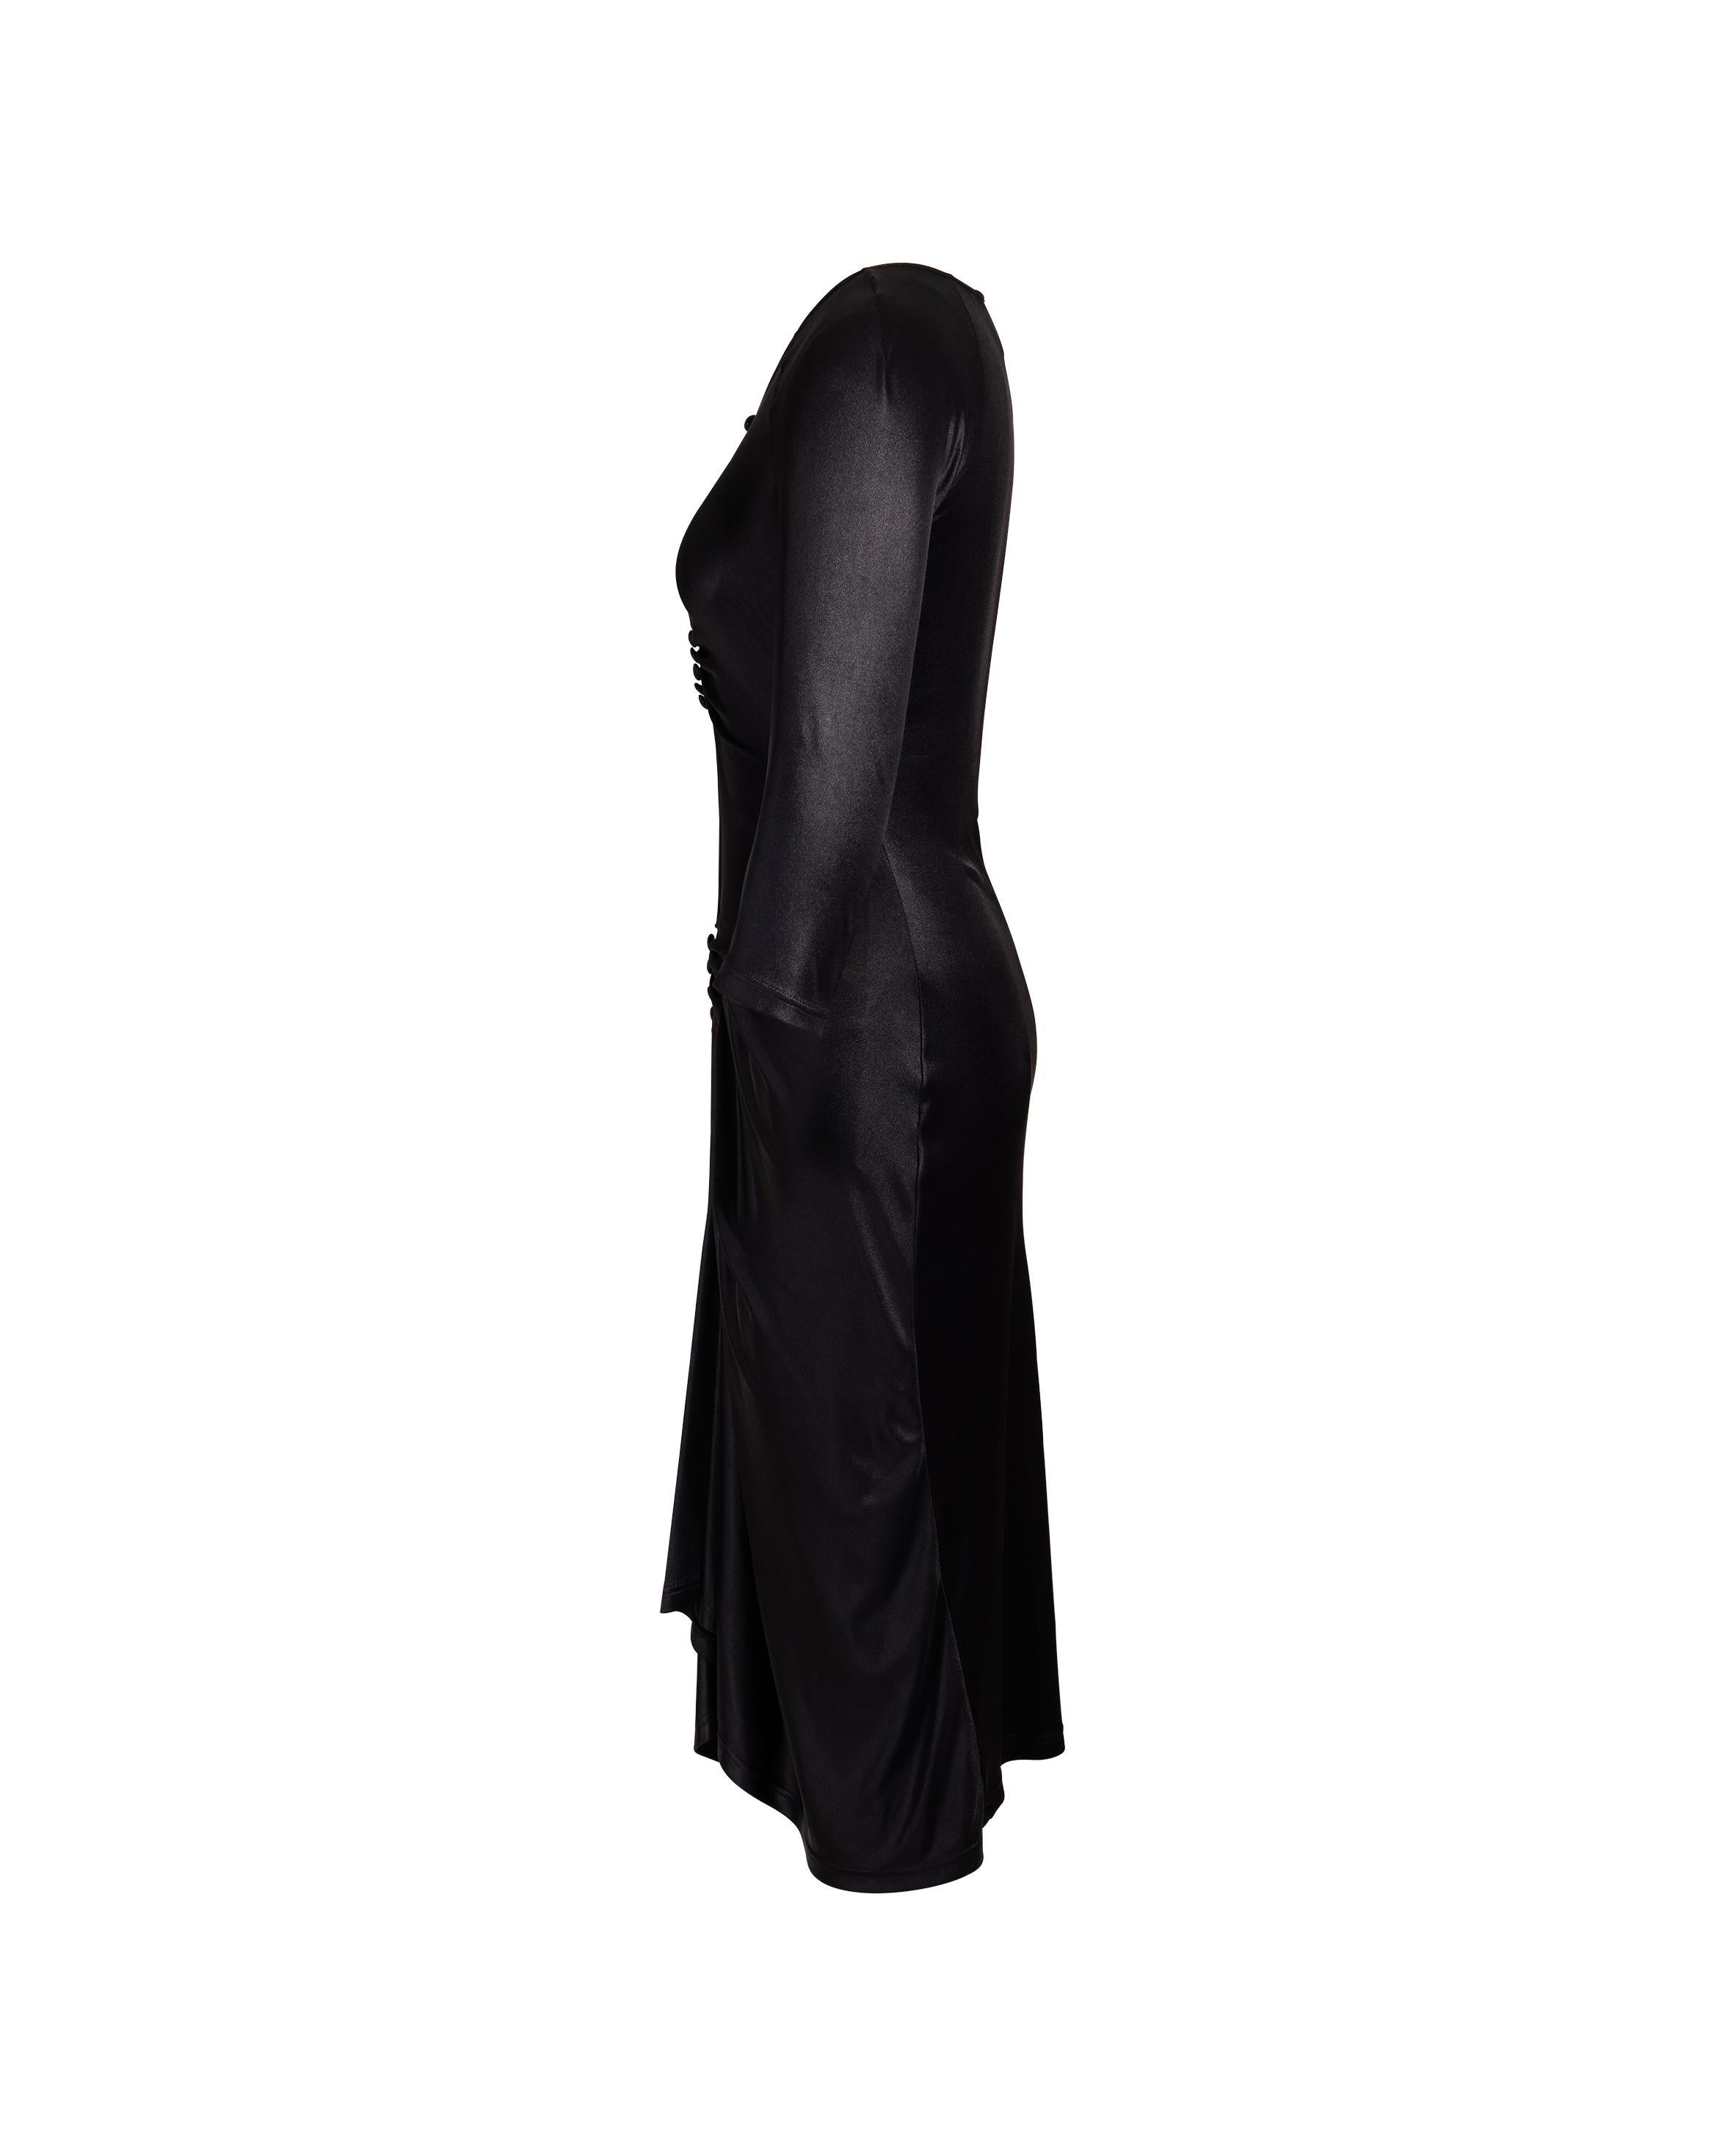 A/W 1998 Vivienne Westwood Red Label black nylon and jersey midi length dress with draped front, cascading towards center black button details. Minor stretch throughout. Fabric gives a ‘wet’ shimmer look that flatters the body. As seen on the